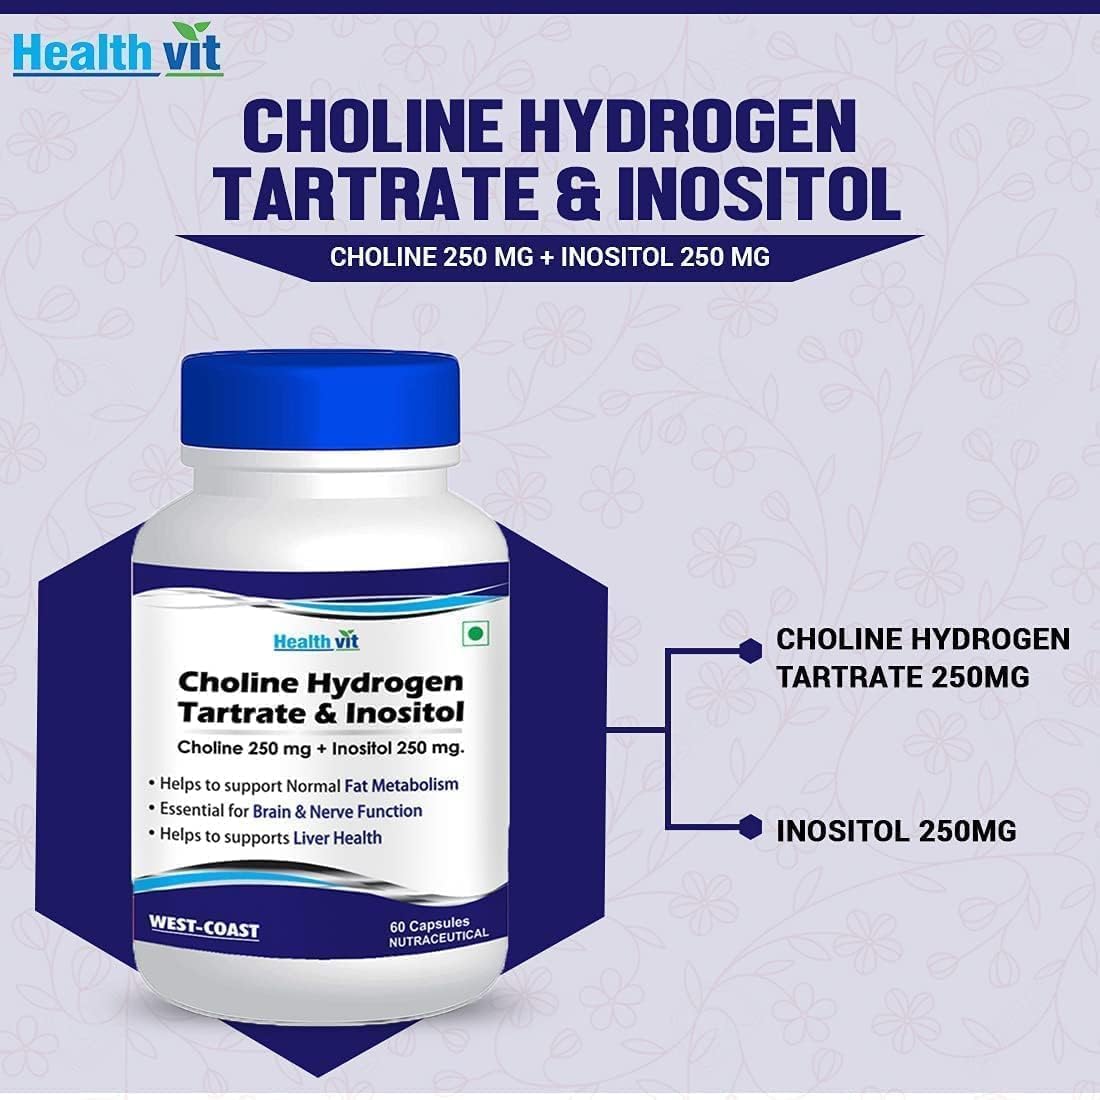 Yuji Choline Hydrogen Tartrate 250mg  Inositol 250 Mg - 60 Capsules | Energy Metabolism, Liver Health, Essential for Brain  Nerve Function - Non-GMO, Vegan, Gluten Free, Dairy Free